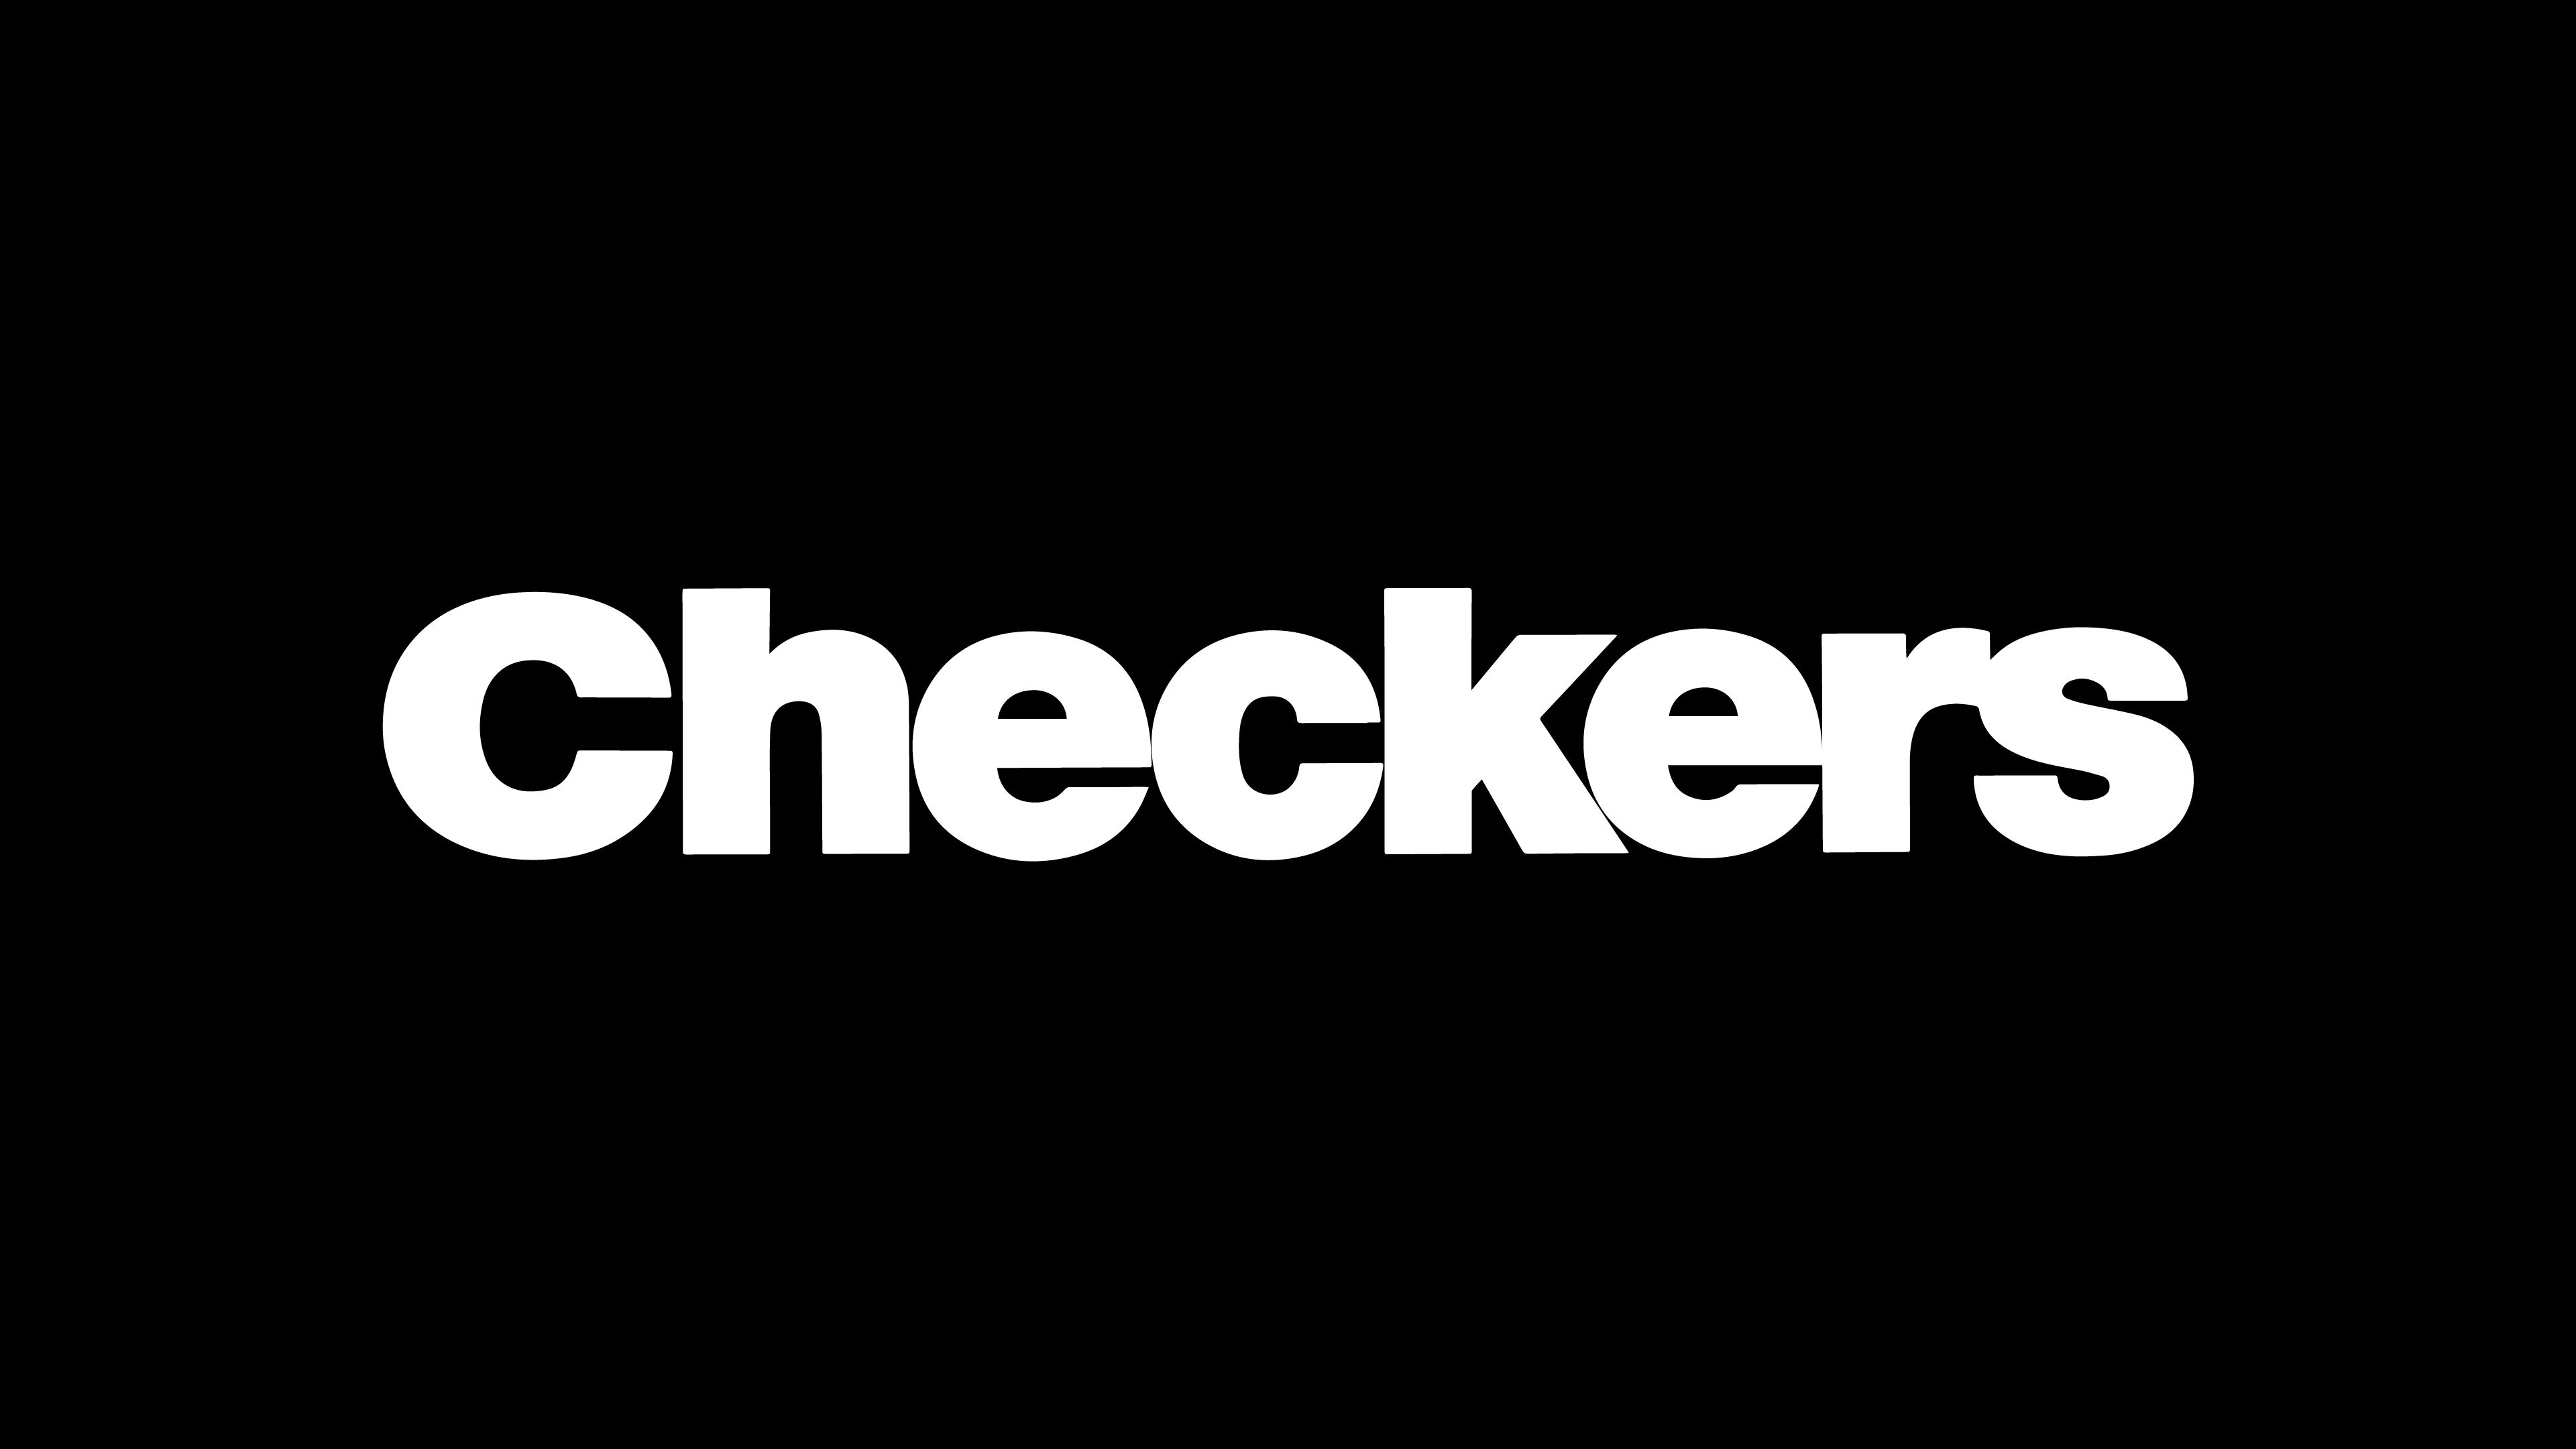 BEST CHECKERS PACK COLLECTION